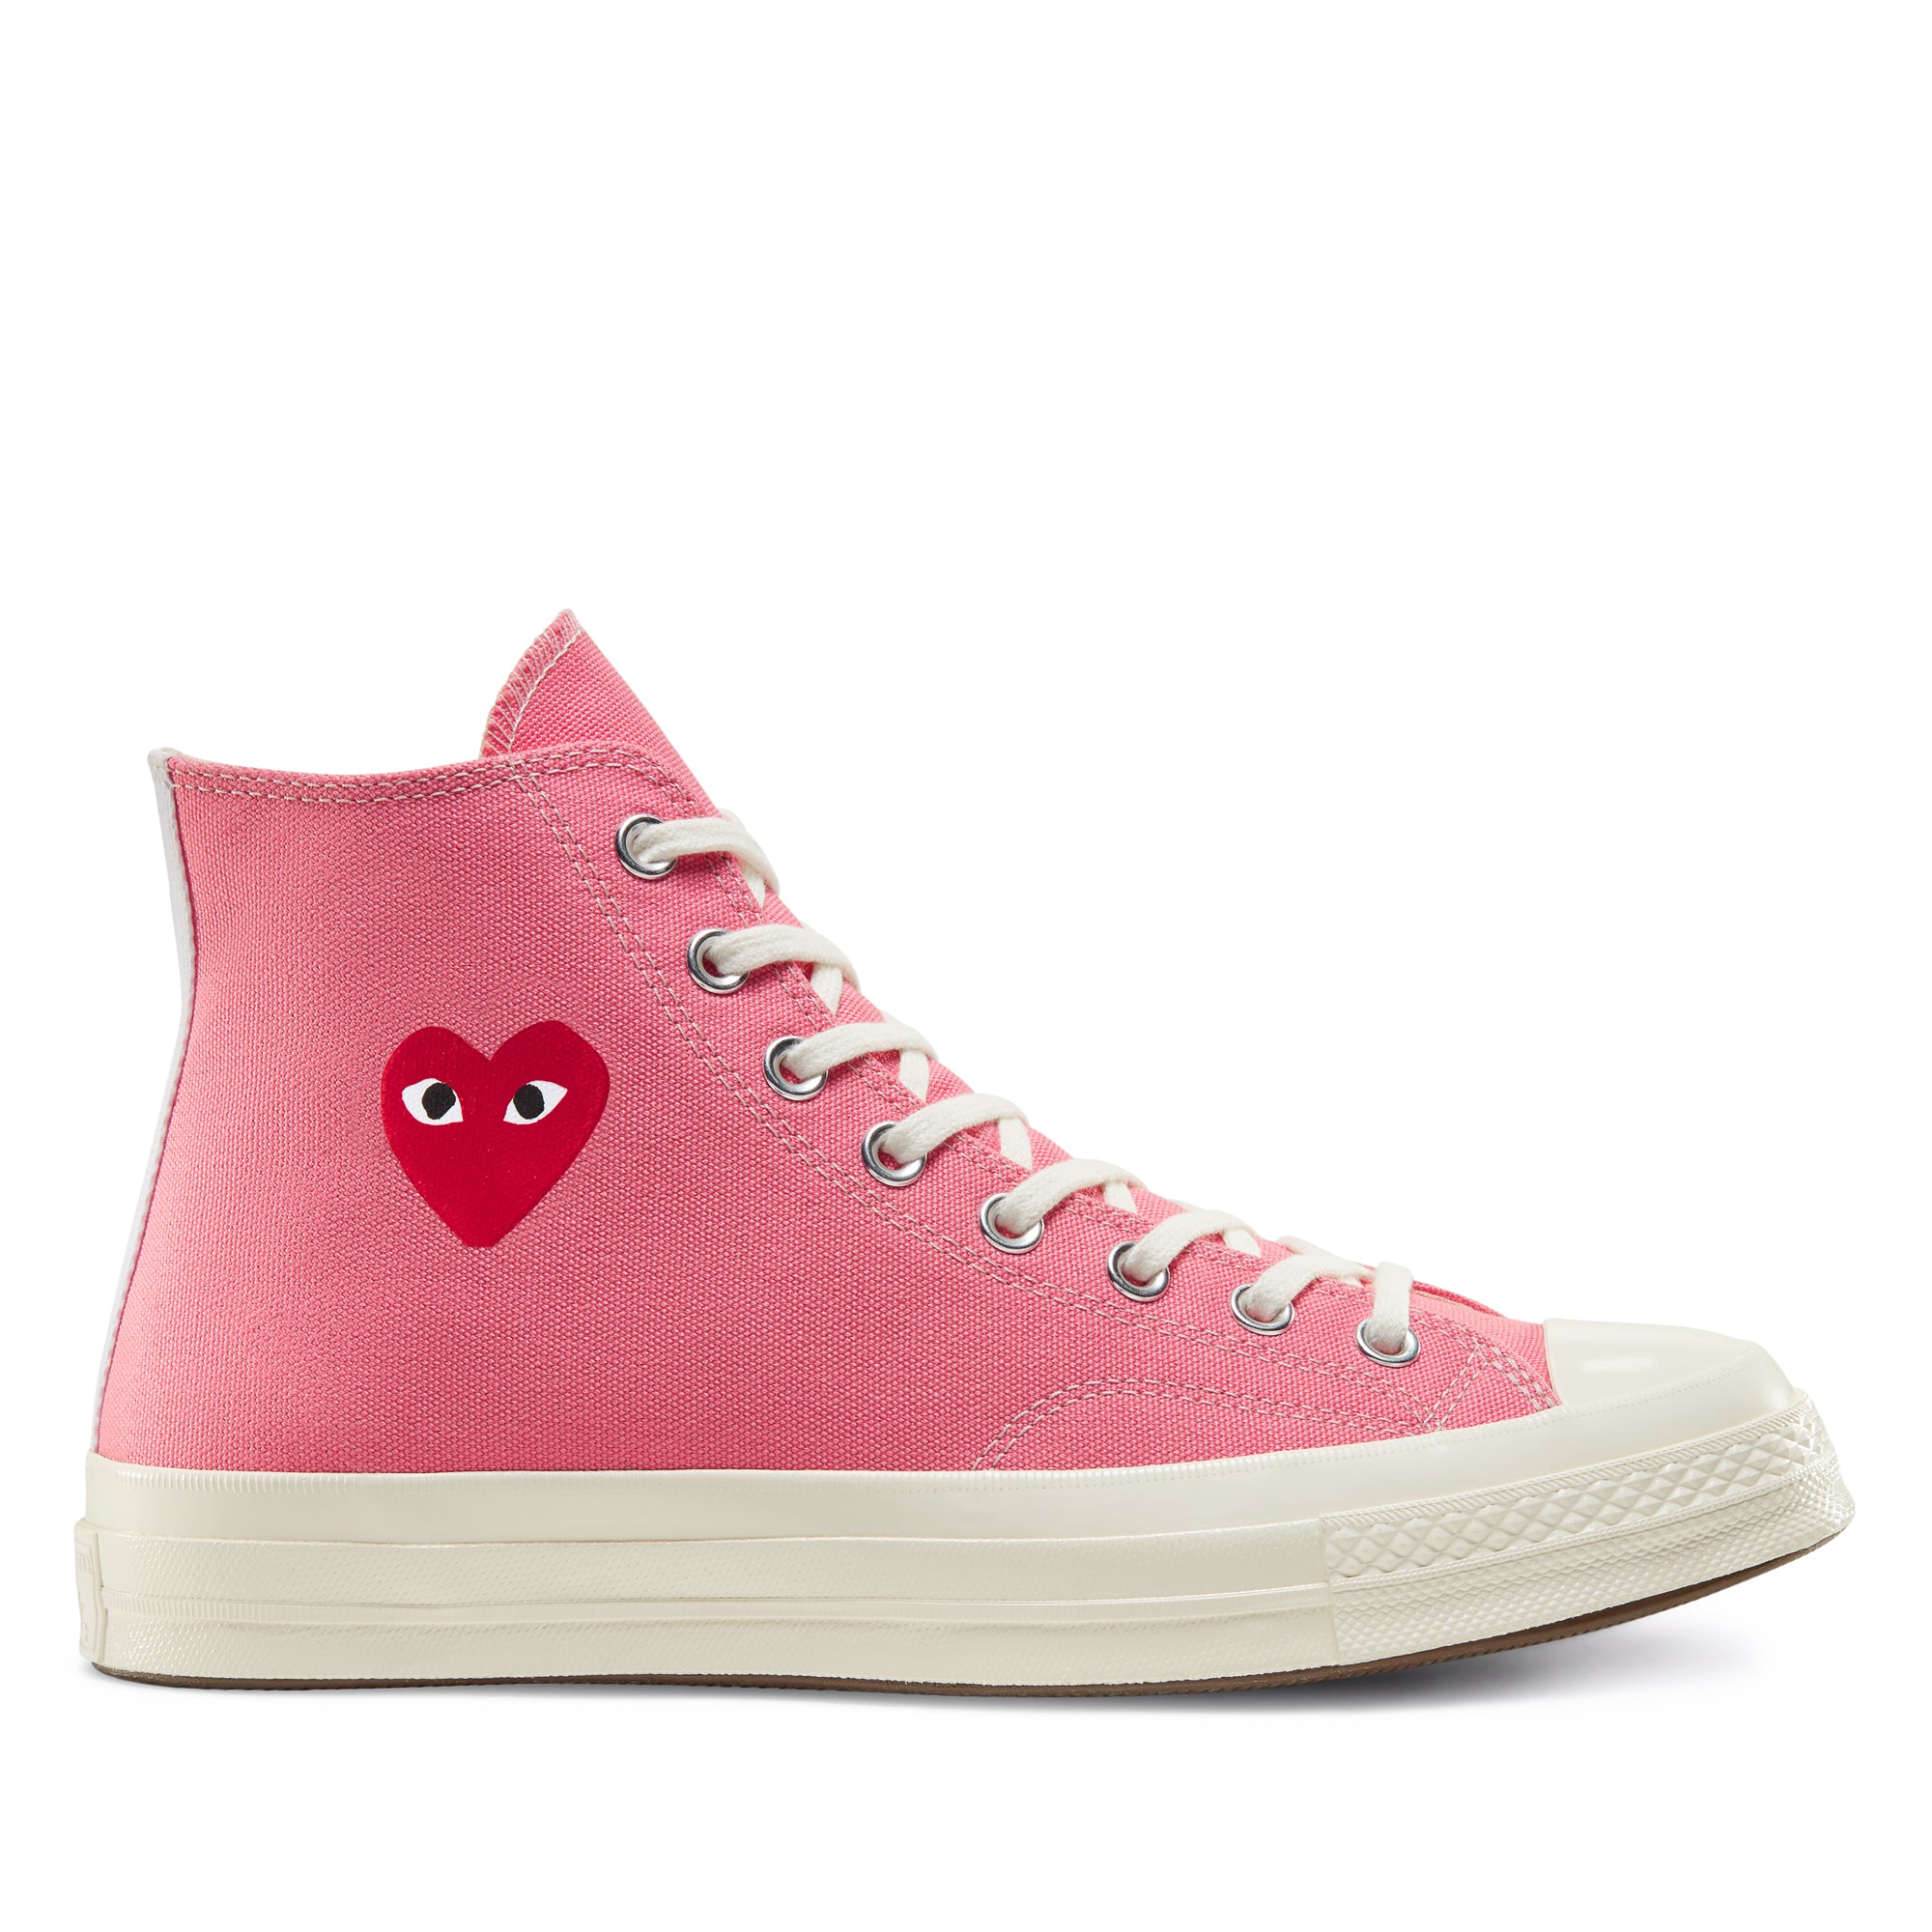 converse pink sole